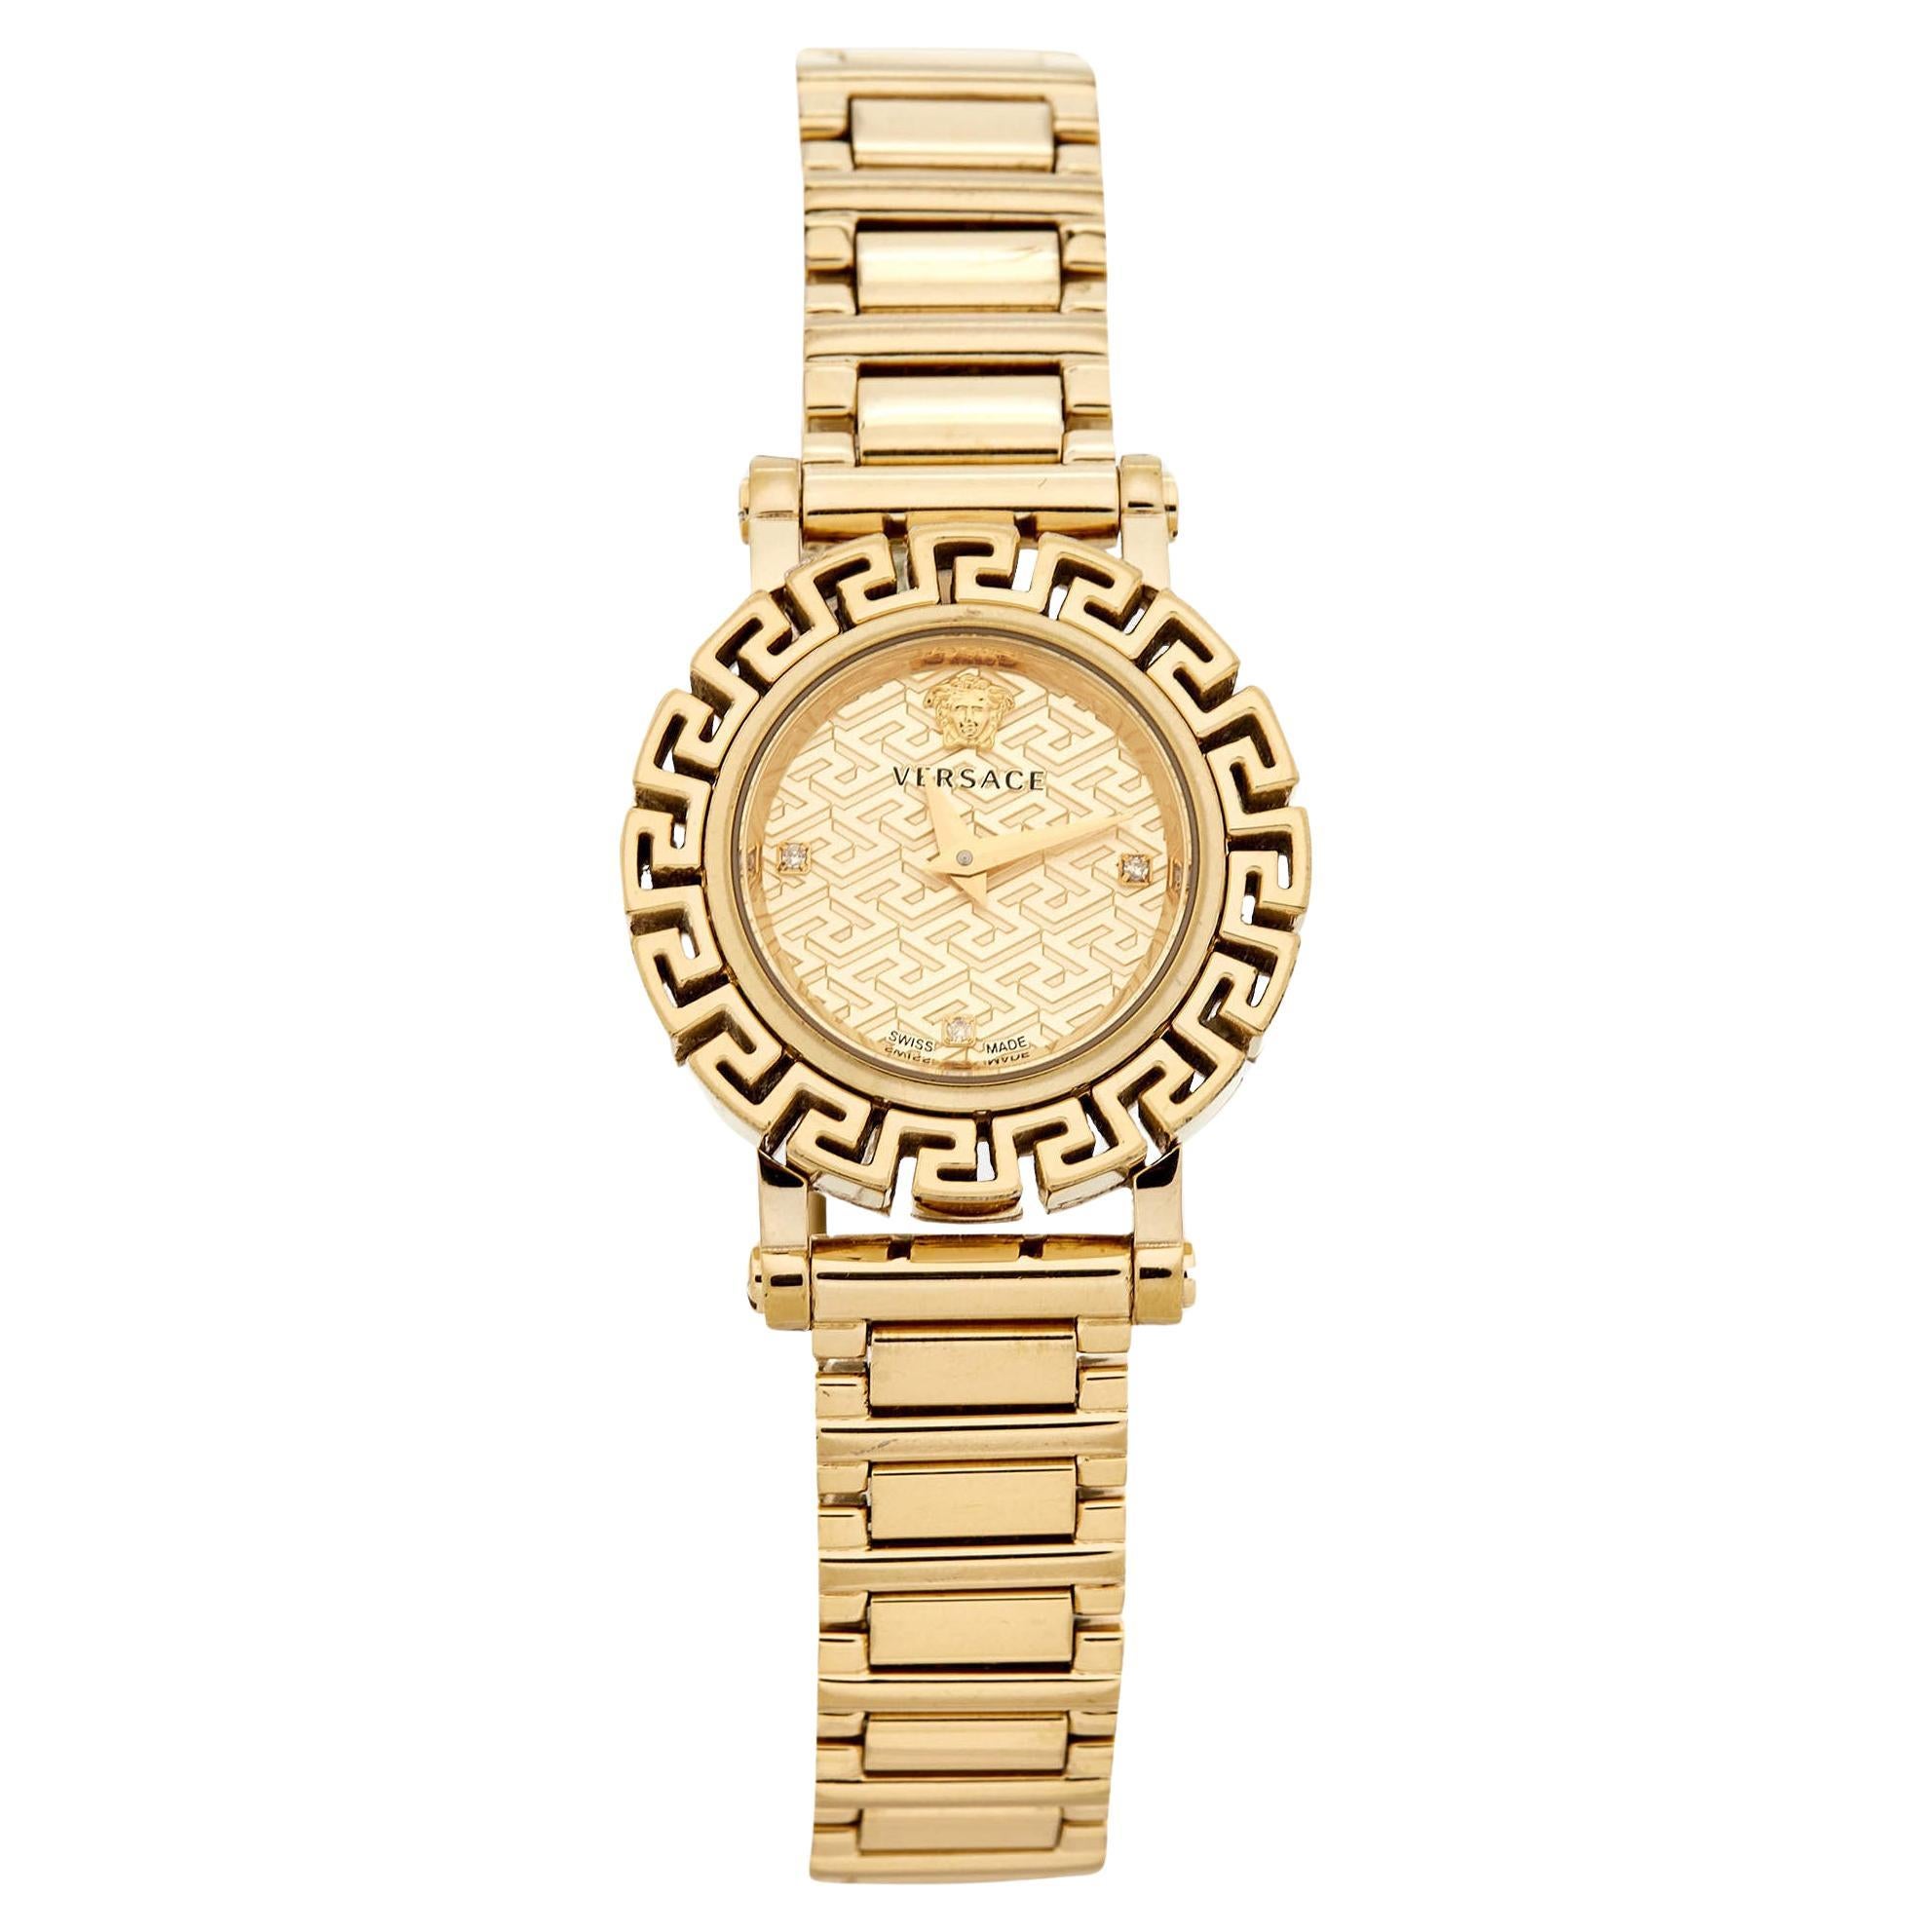 Versace Champagne Gold Plated Stainless Greca Glam Women's Wristwatch 29 mm